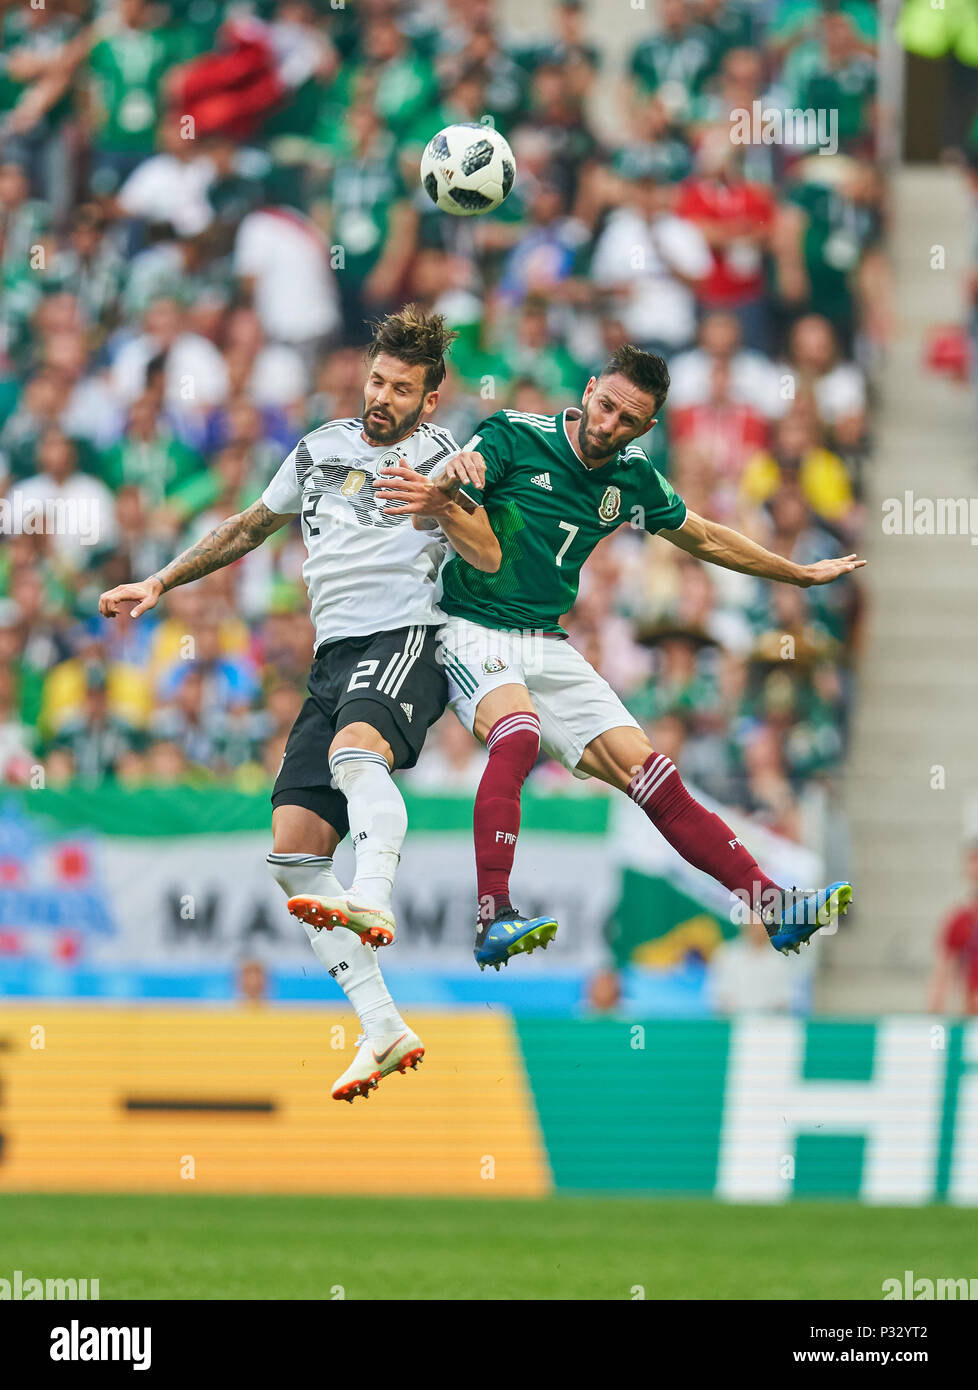 Moscow, Russia, 17 June 2018. Germany - Mexico, Soccer, Moscow, June 17, 2018 Marvin PLATTENHARDT, DFB 2  compete for the ball, tackling, duel, header against Miguel LAYUN, Mex 7  GERMANY - MEXICO FIFA WORLD CUP 2018 RUSSIA, Group F, Season 2018/2019,  June 17, 2018 L u z h n i k i Stadium in Moscow, Russia.  © Peter Schatz / Alamy Live News Stock Photo